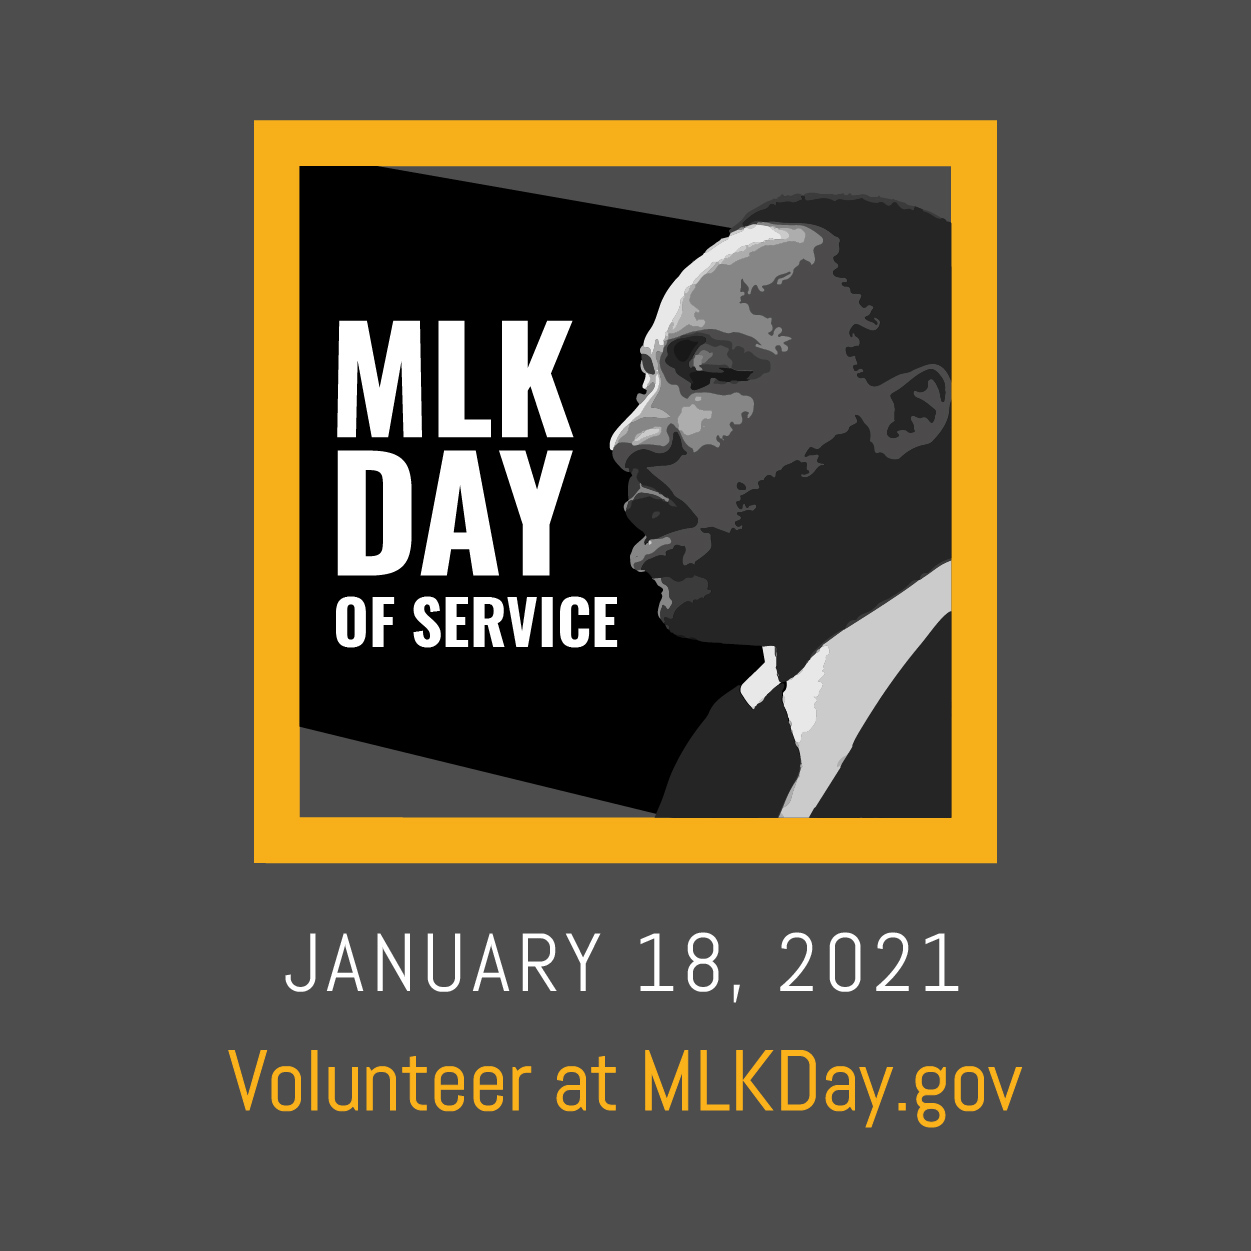 decorative graphic. MLK Day of Service. January 18, 2021. Volunteer at MLKDay.gov